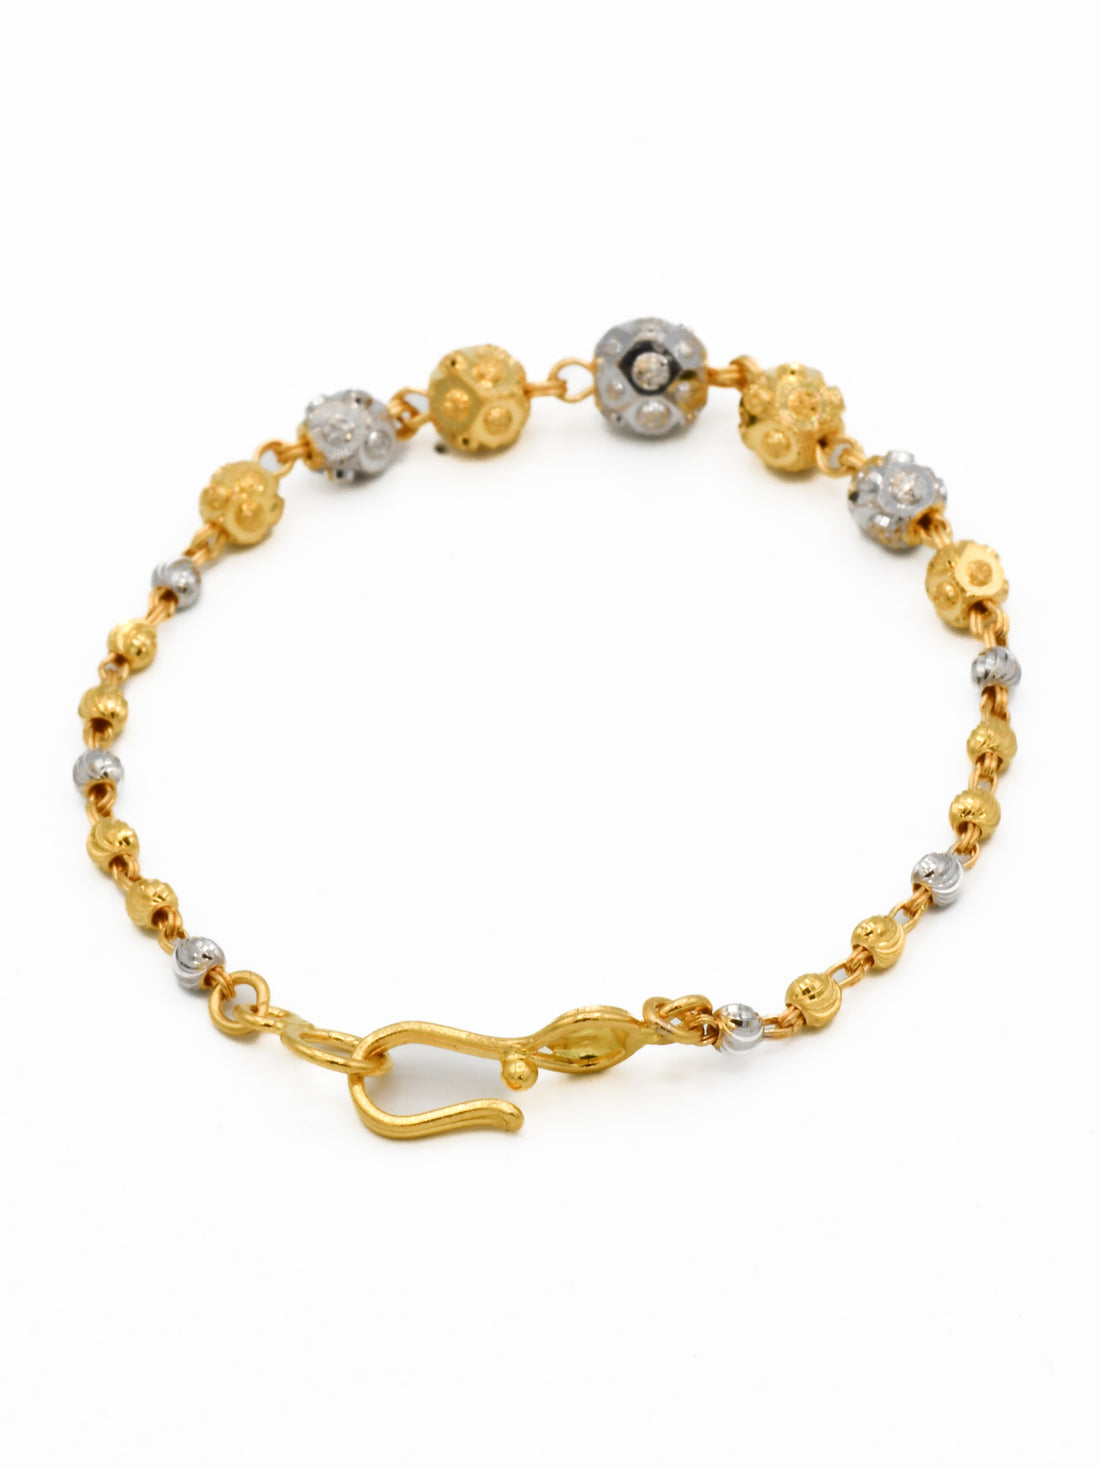 22ct Gold Two Tone Ball Baby Bracelet - Roop Darshan